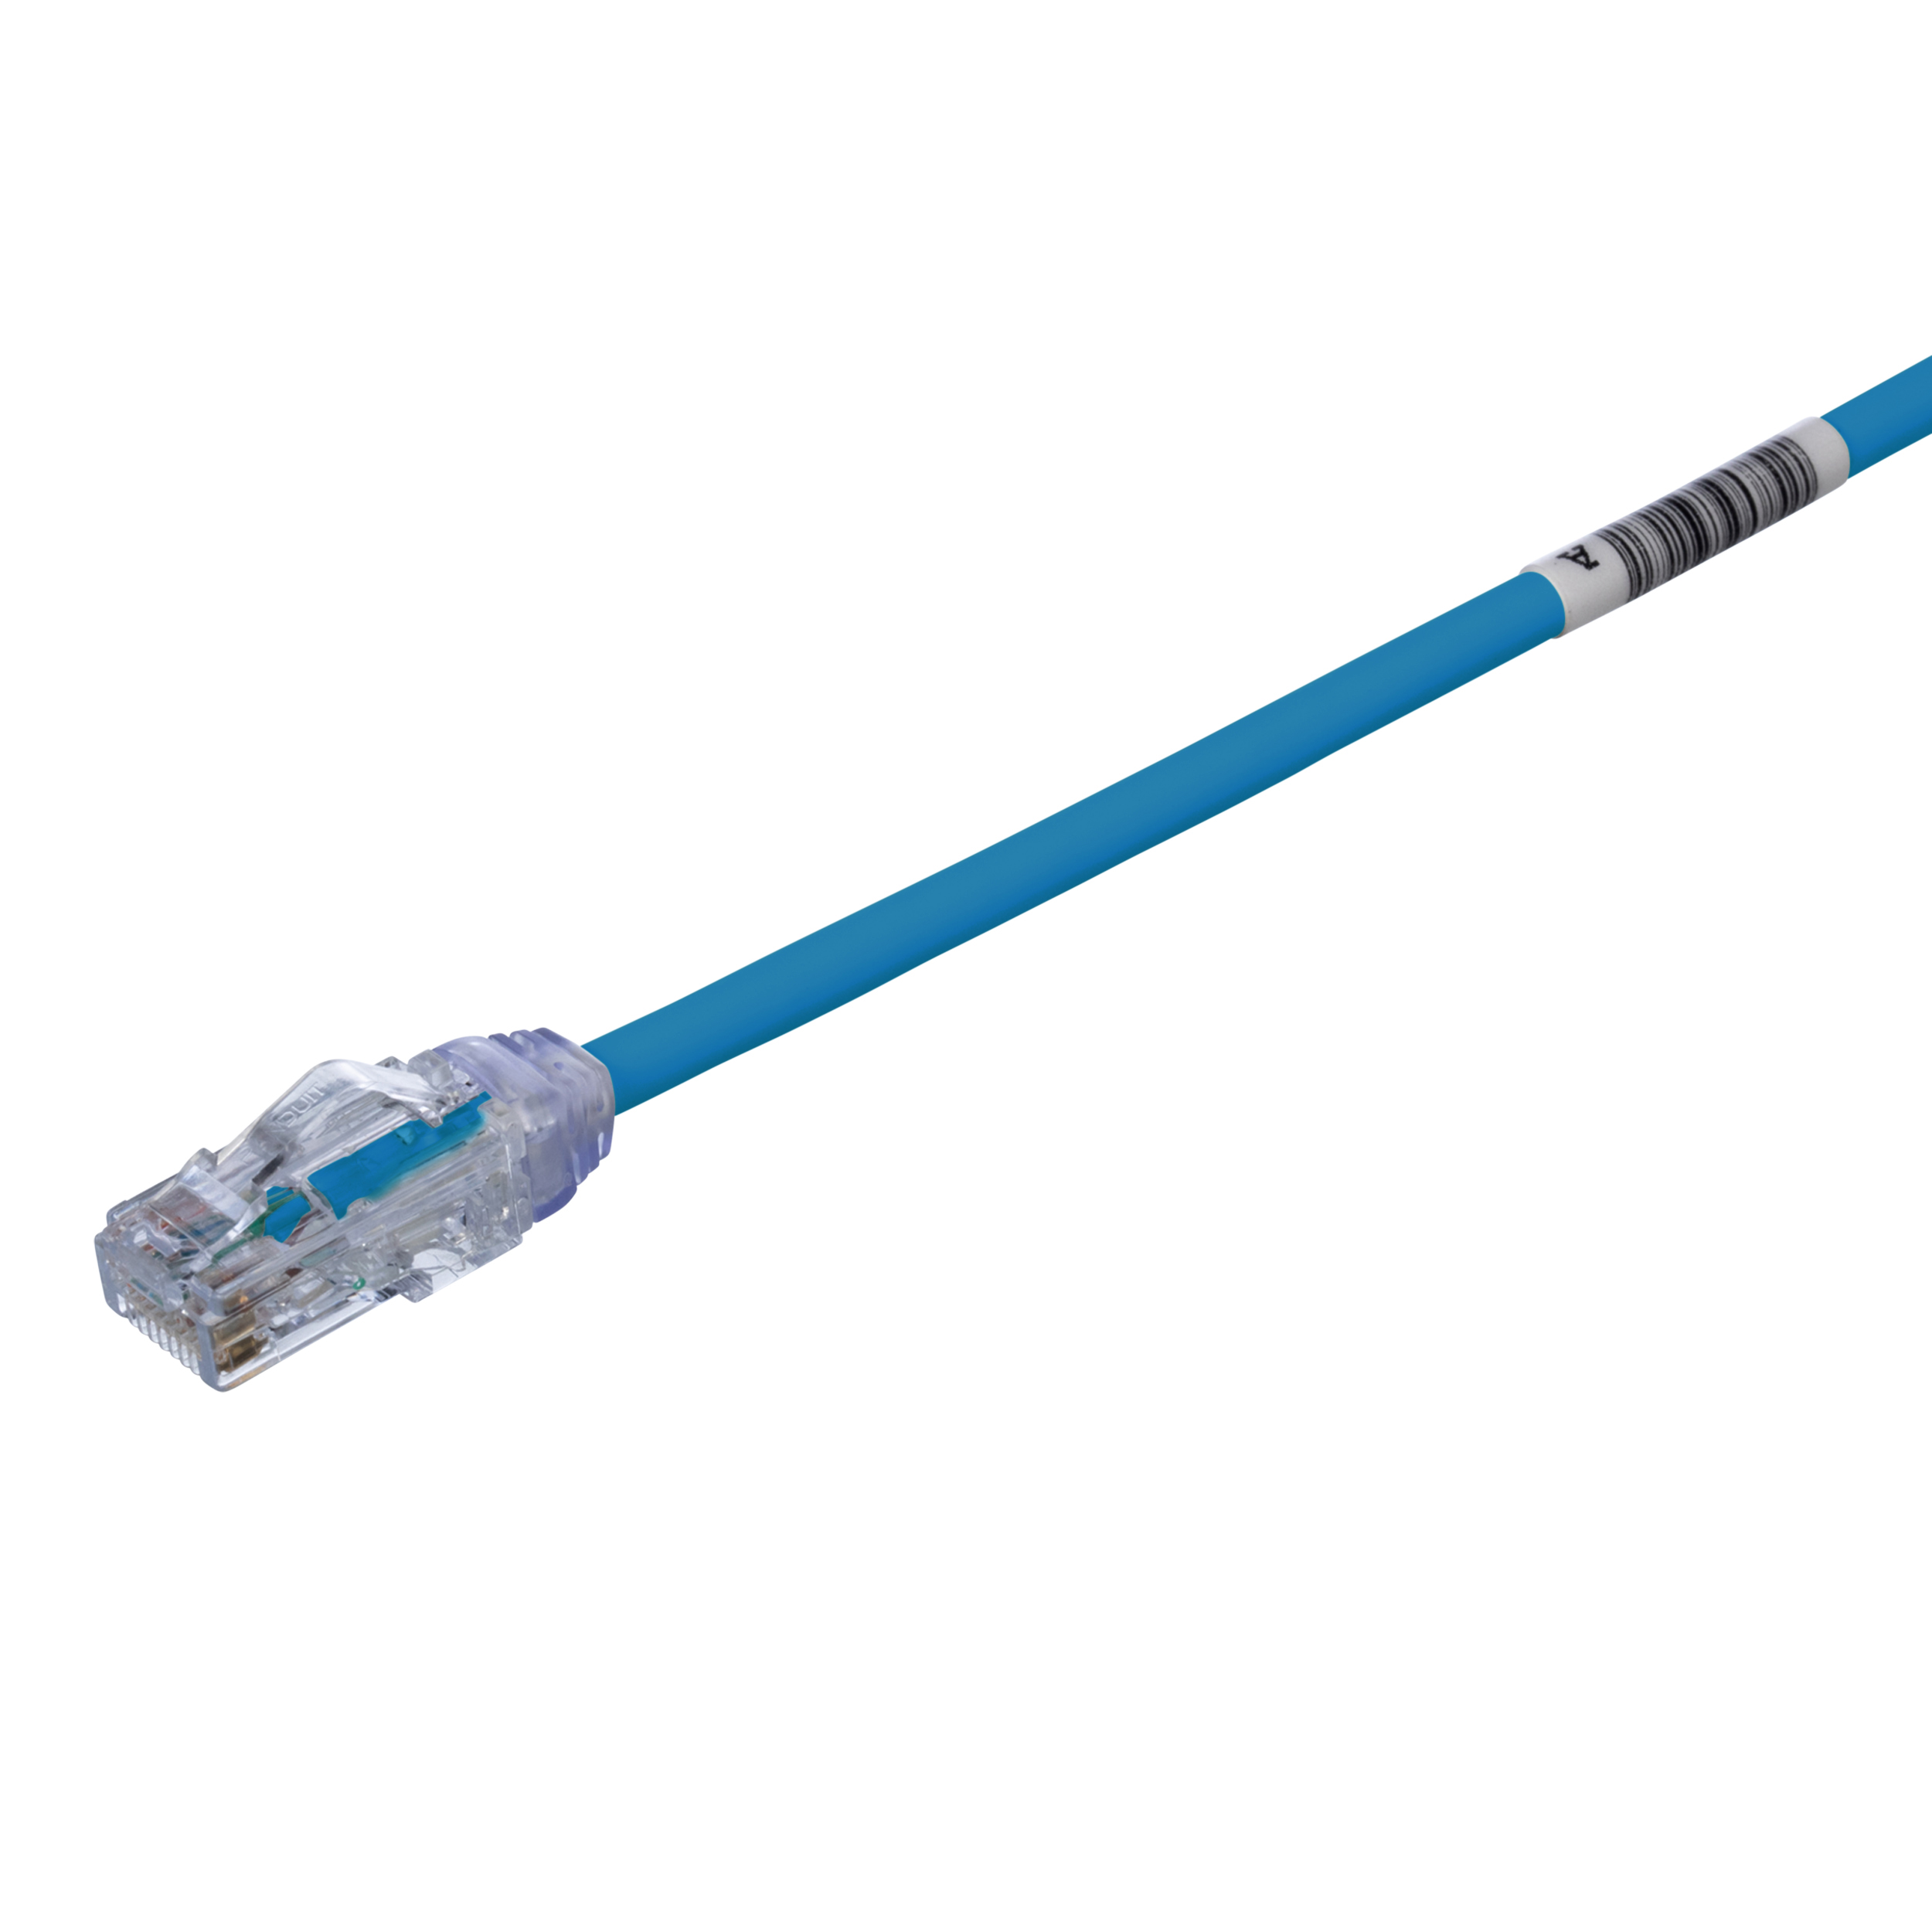 Cat 6A 28 AWG UTP Copper Patch Cord, 1 ft, Blue